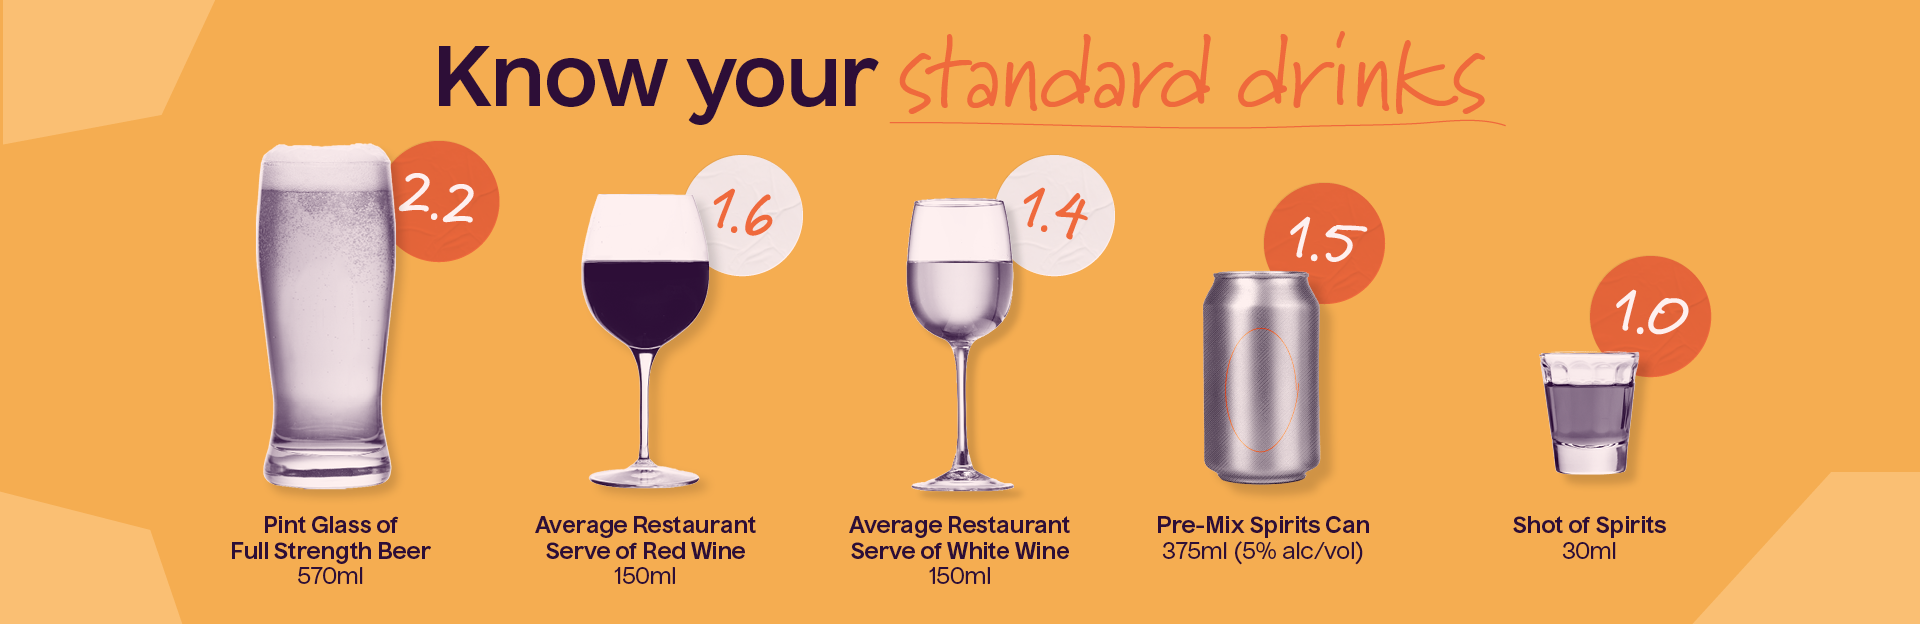 The heading "Know your standard drinks". Below is a pint of beer with the text "Pink glass of full strength beer / 750 ml" and a bubble with the text "2.2" in reference to number of standard drinks, a glass of red wine with the text "Average restaurant serve of red wine / 150 ml" and a bubble with the text "1.6", a glass of white wine with the text "Average restaurant servce of white wine / 150 ml" and a bubble with the text "1.4", a can with the text "Pre-mix spirits can / 375 ml (5% alc/vol)" and a bubble with the text "1.5", a shot of liquor with the text "Shot of spirits / 30ml" and a bubble with the text "1.0"